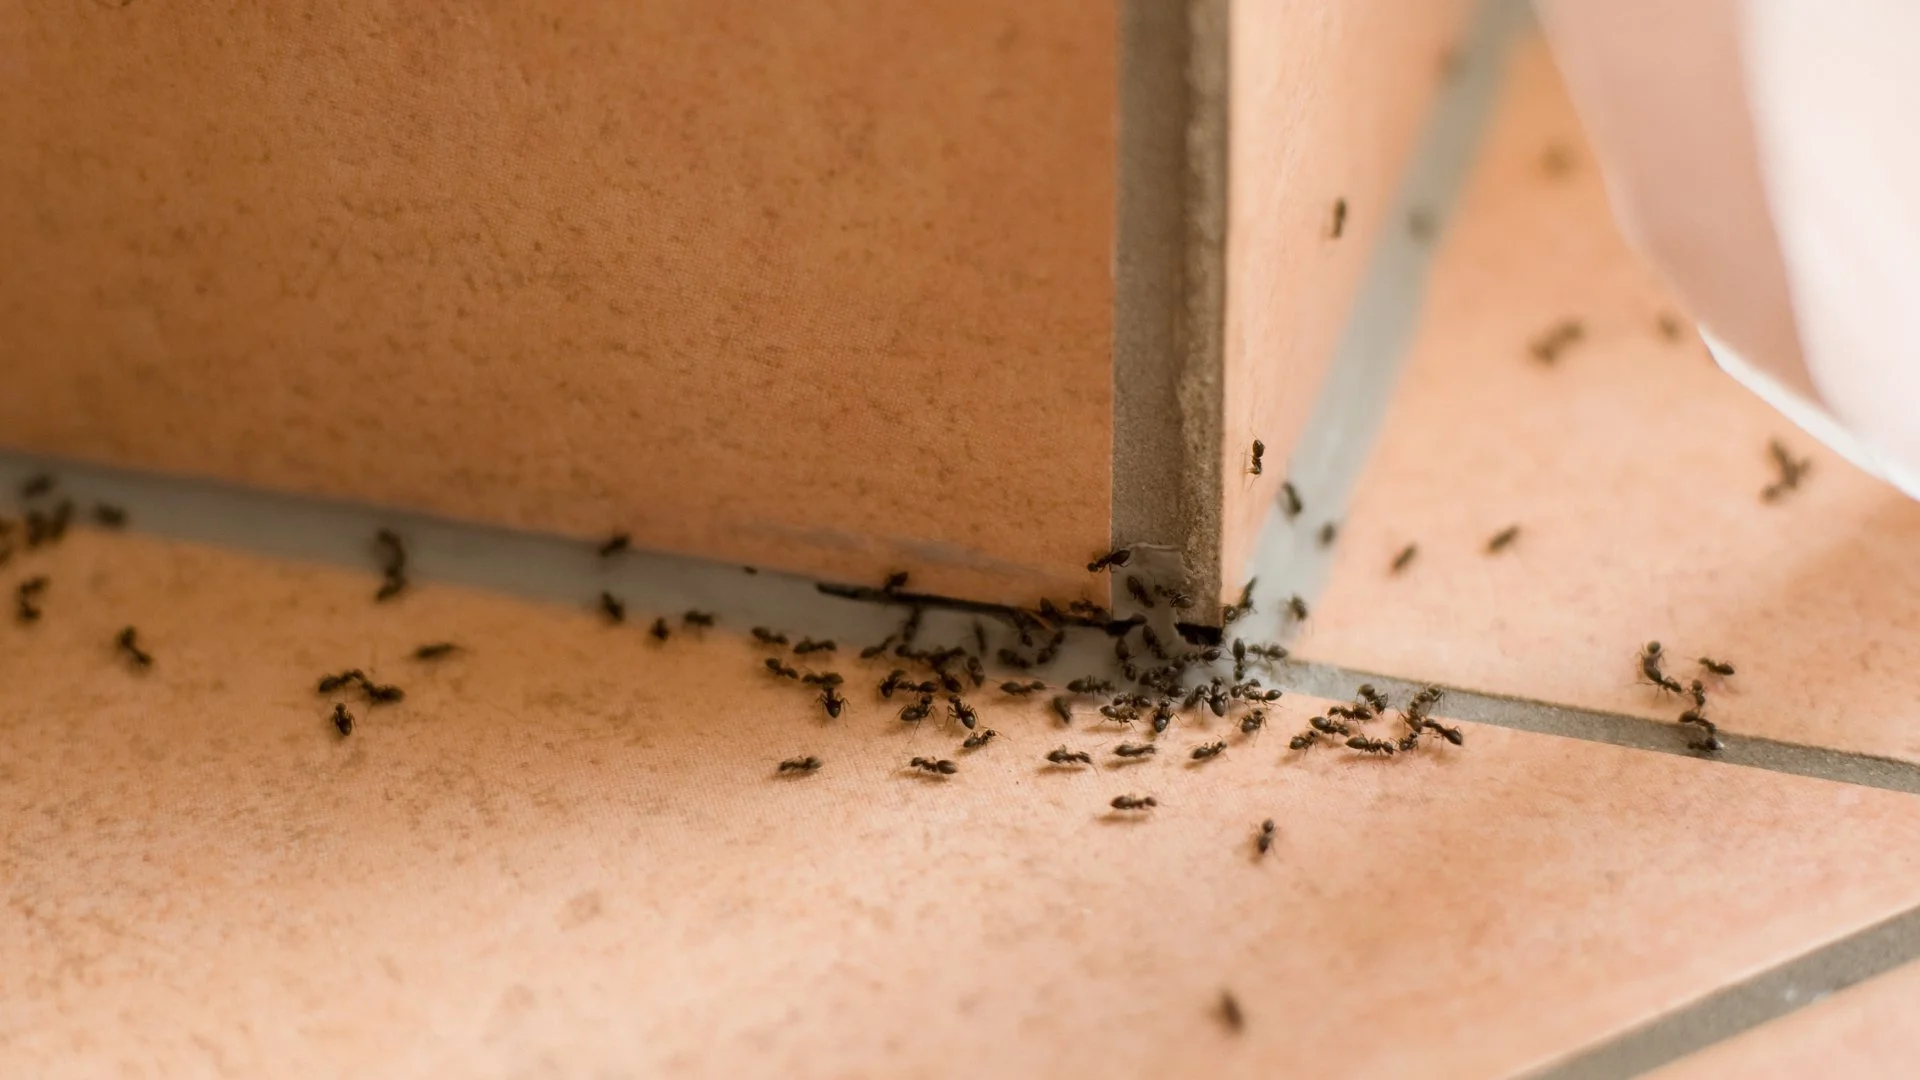 Controlling Ants in Your Home - Baits vs Sprays